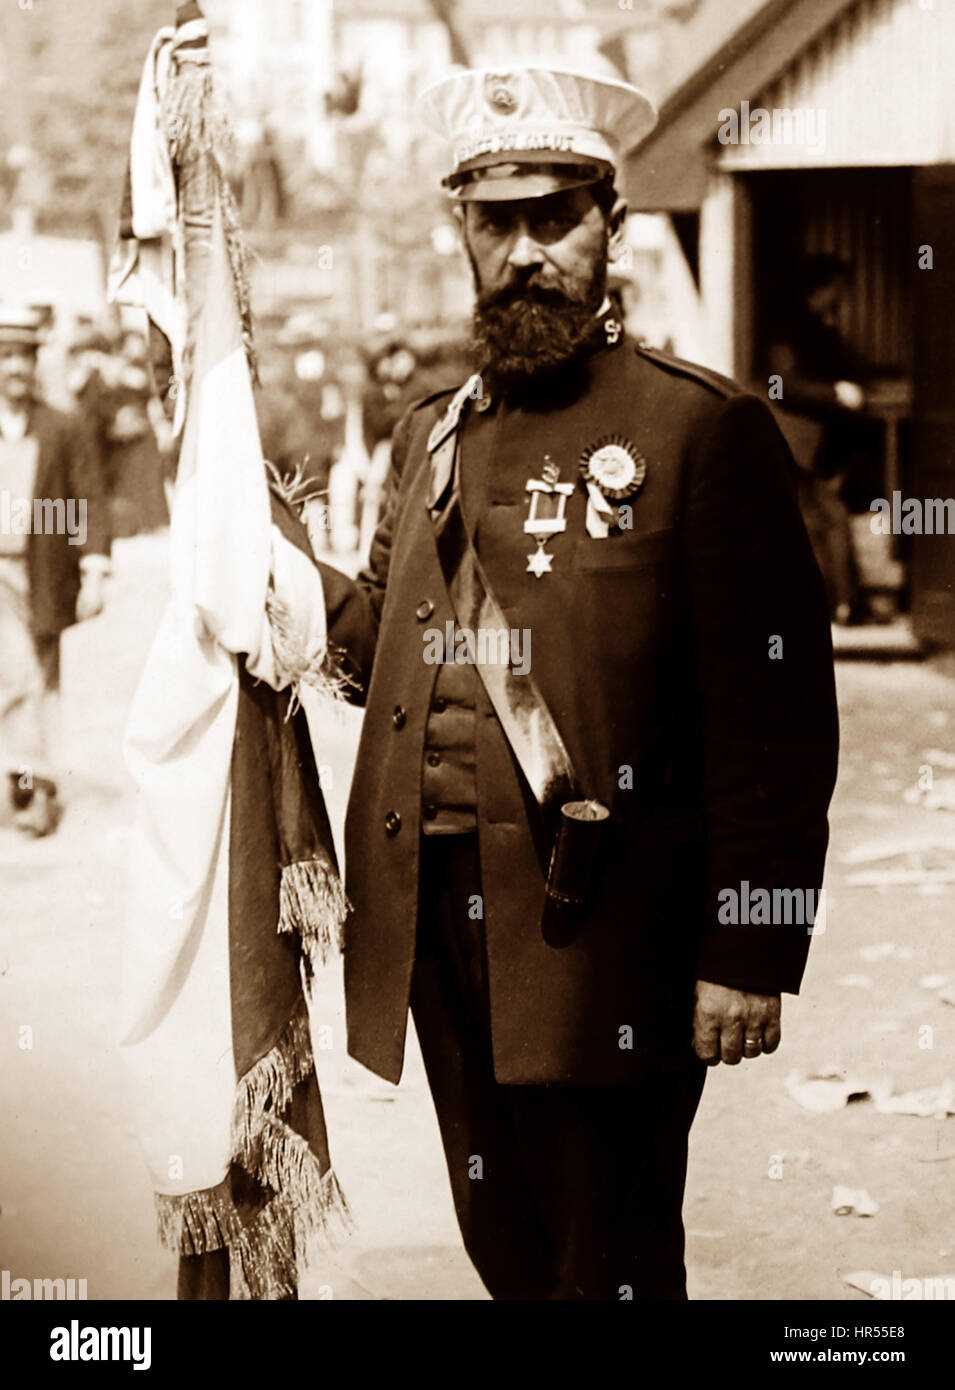 Armee du Salut - Salvation Army in France - early 1900s Stock Photo